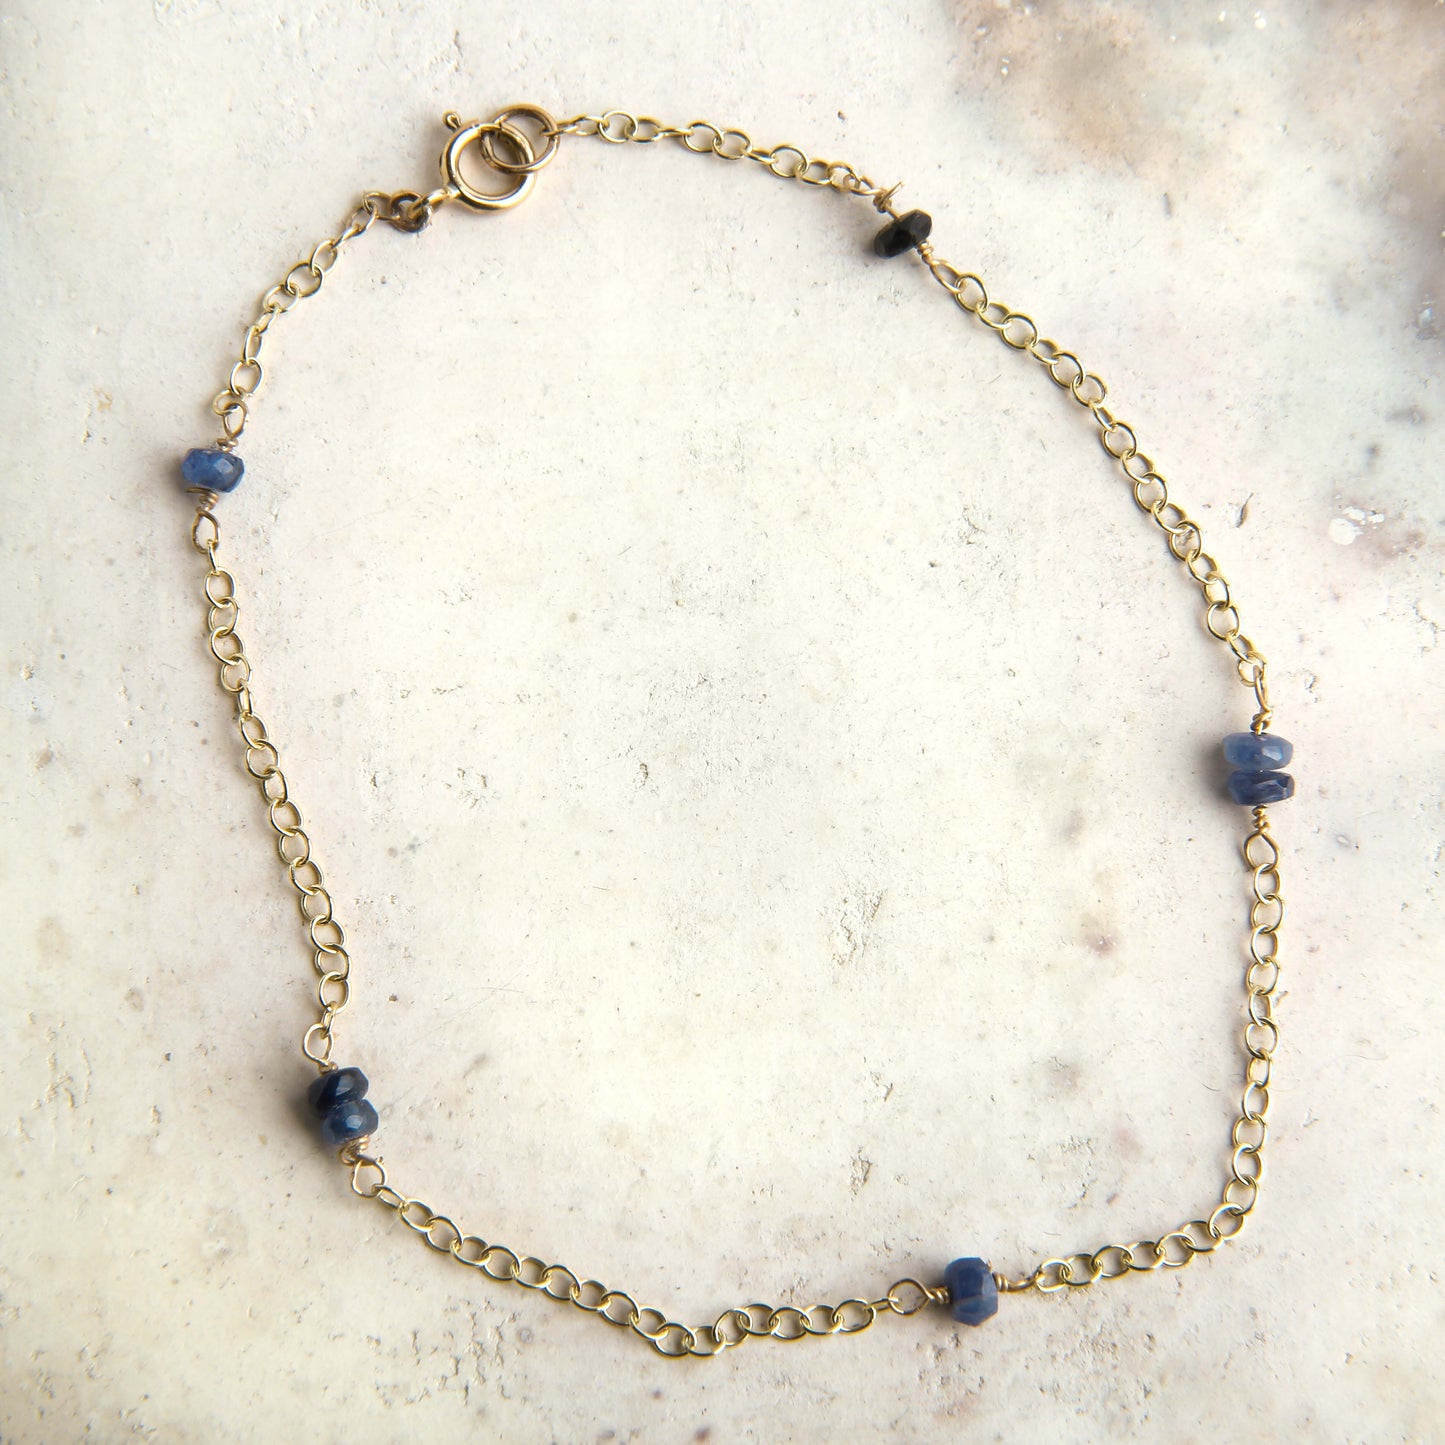 handmade faceted gemstone chain bracelet with blue sapphire beads